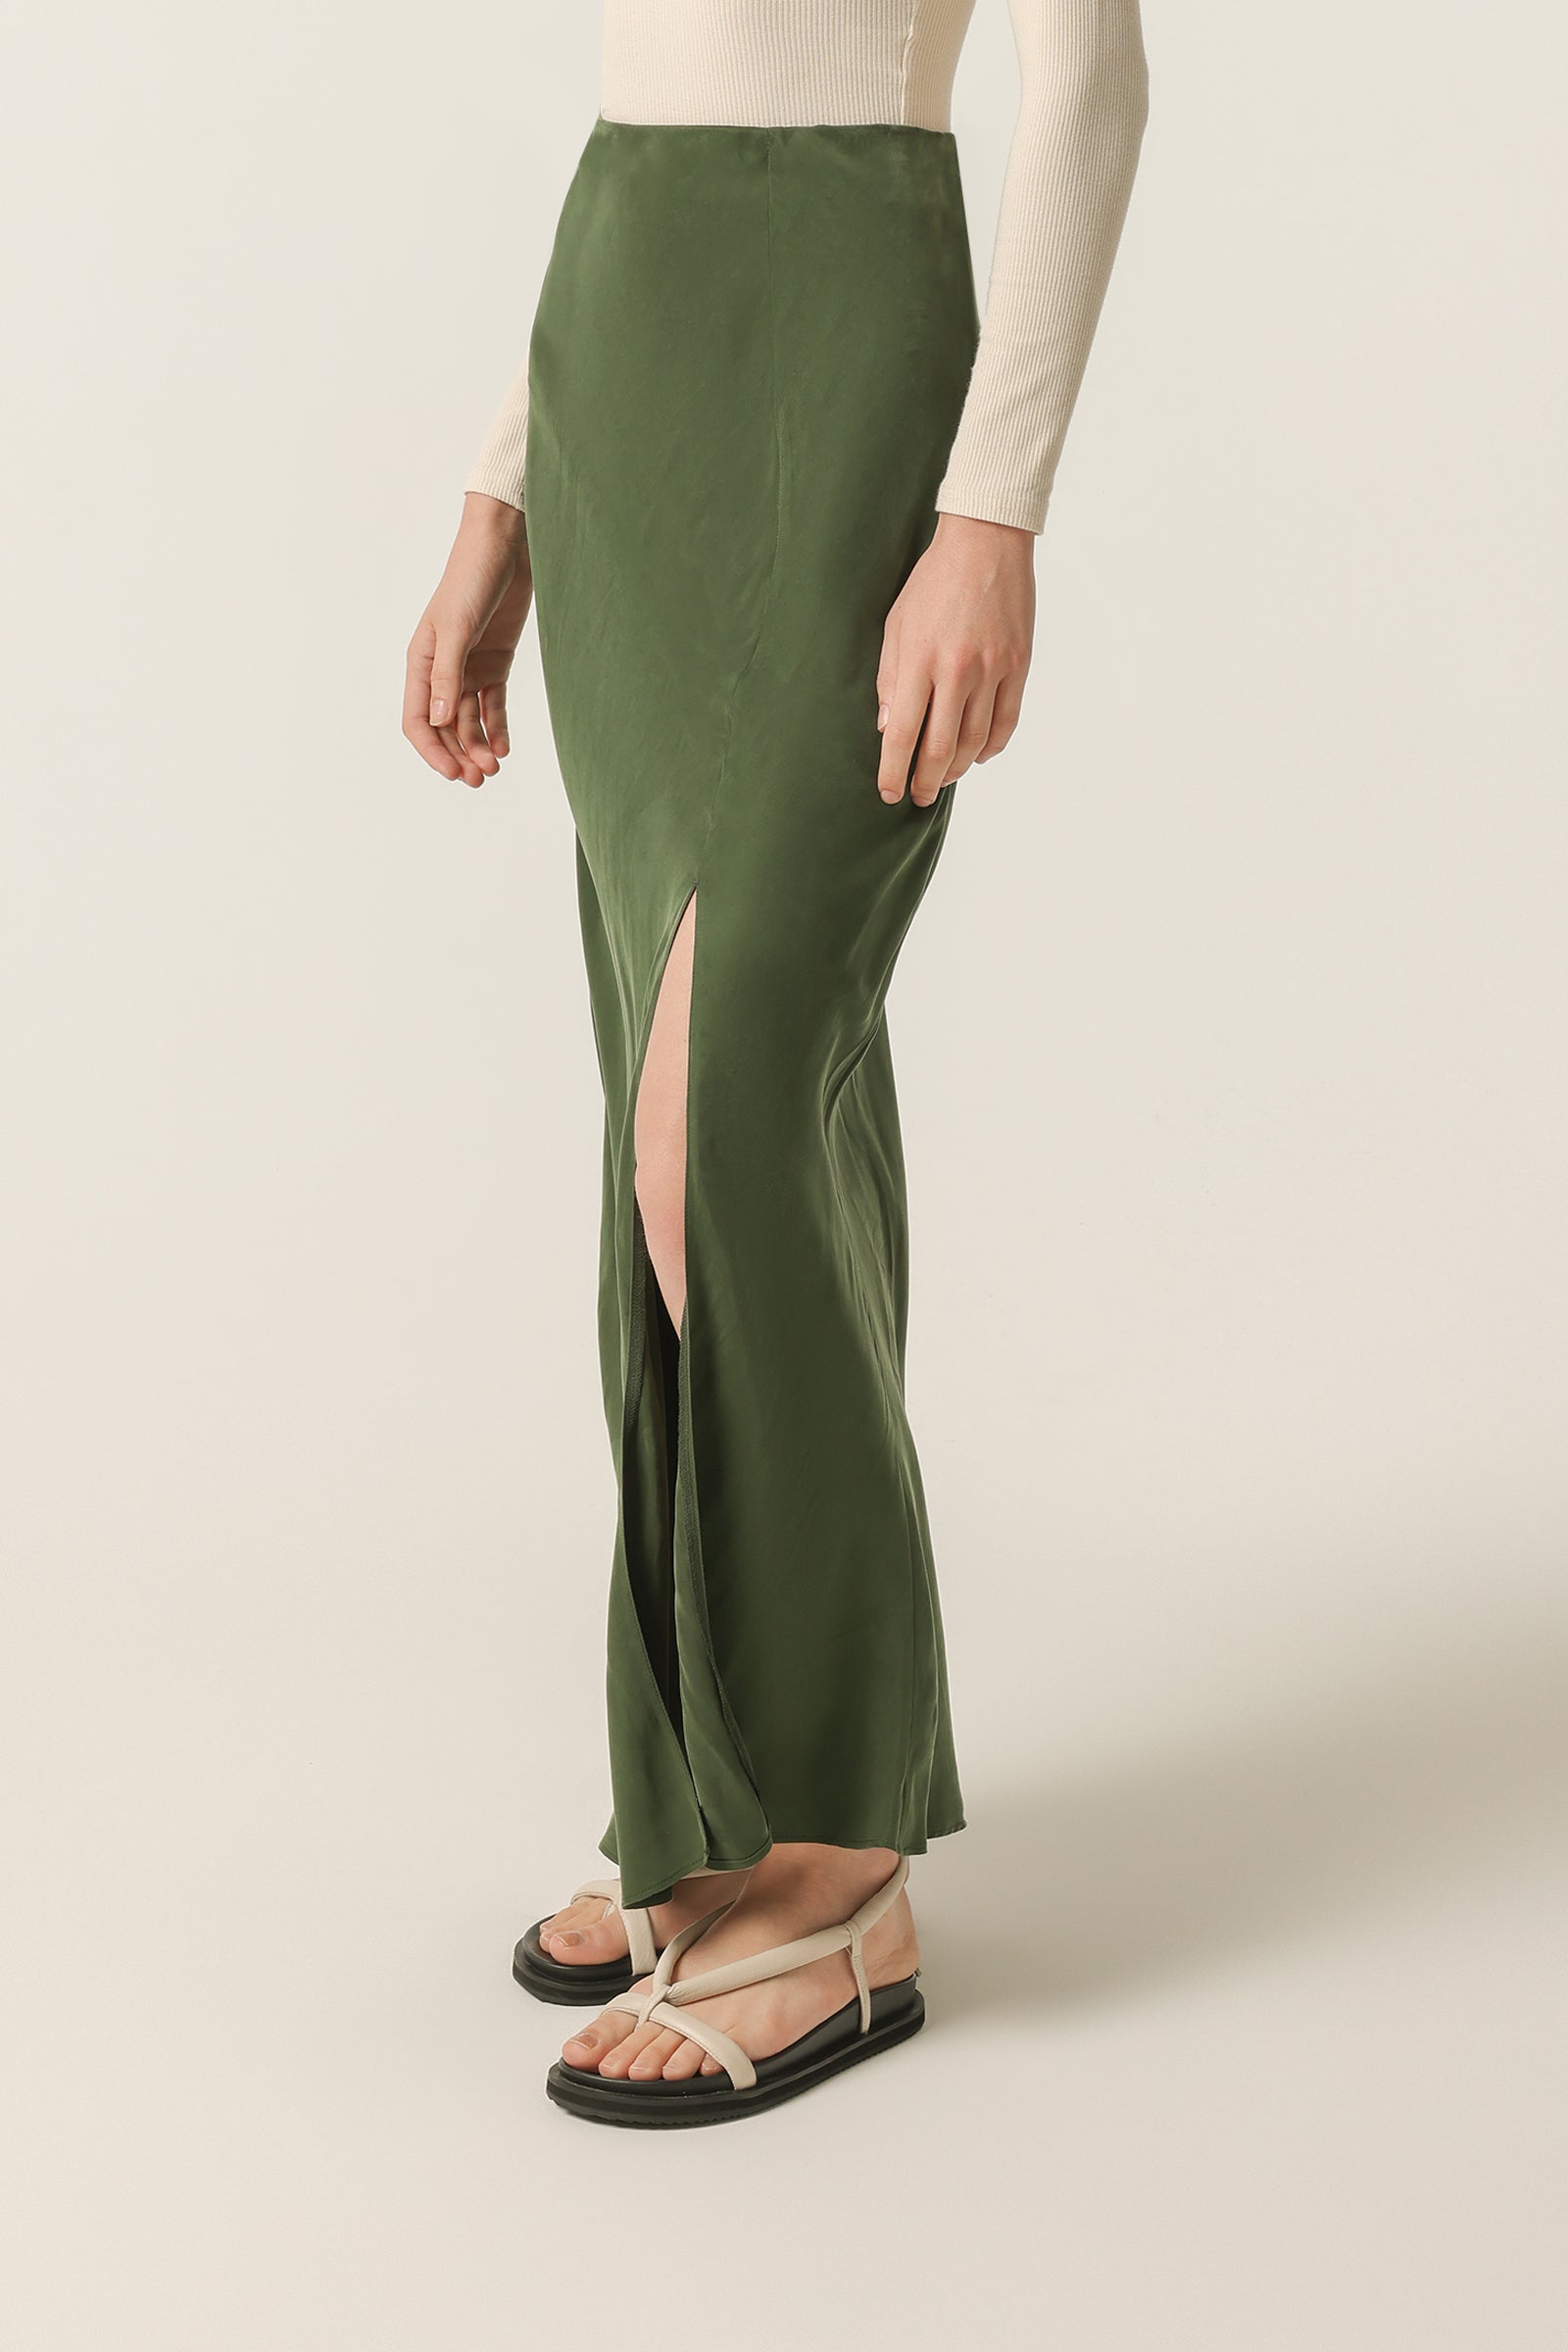 Nude Lucy Harlow Cupro Maxi Skirt in Pine